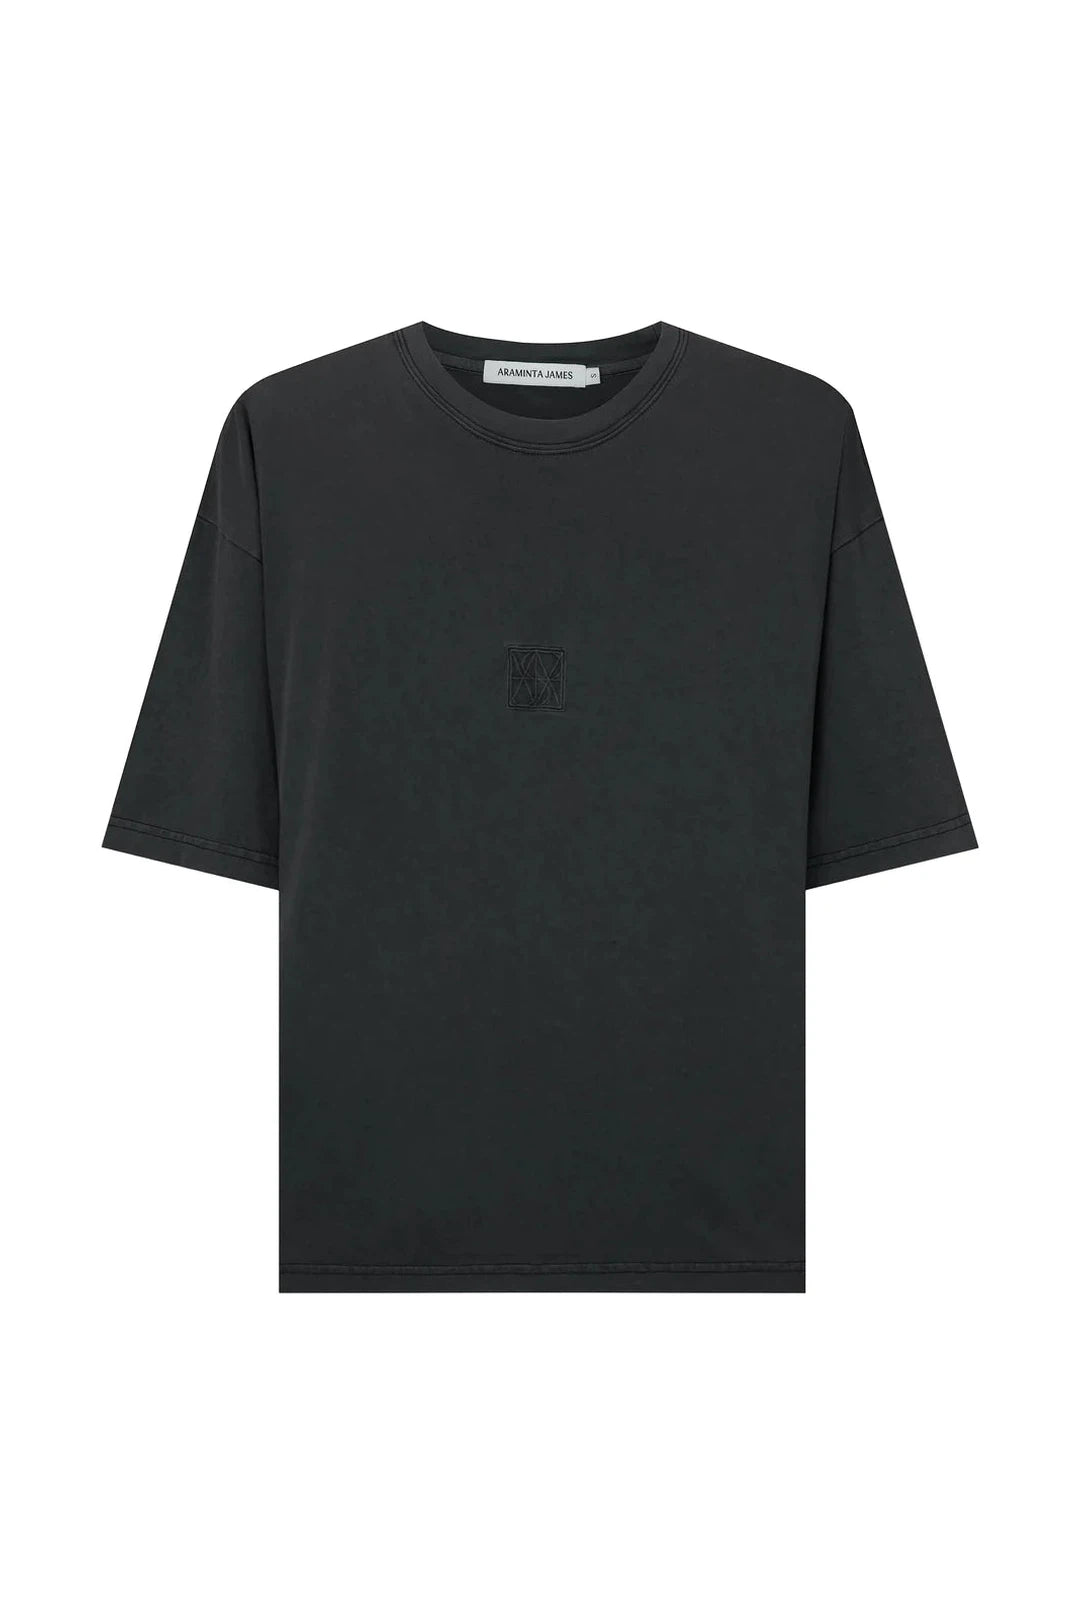 Classic tee, washed black